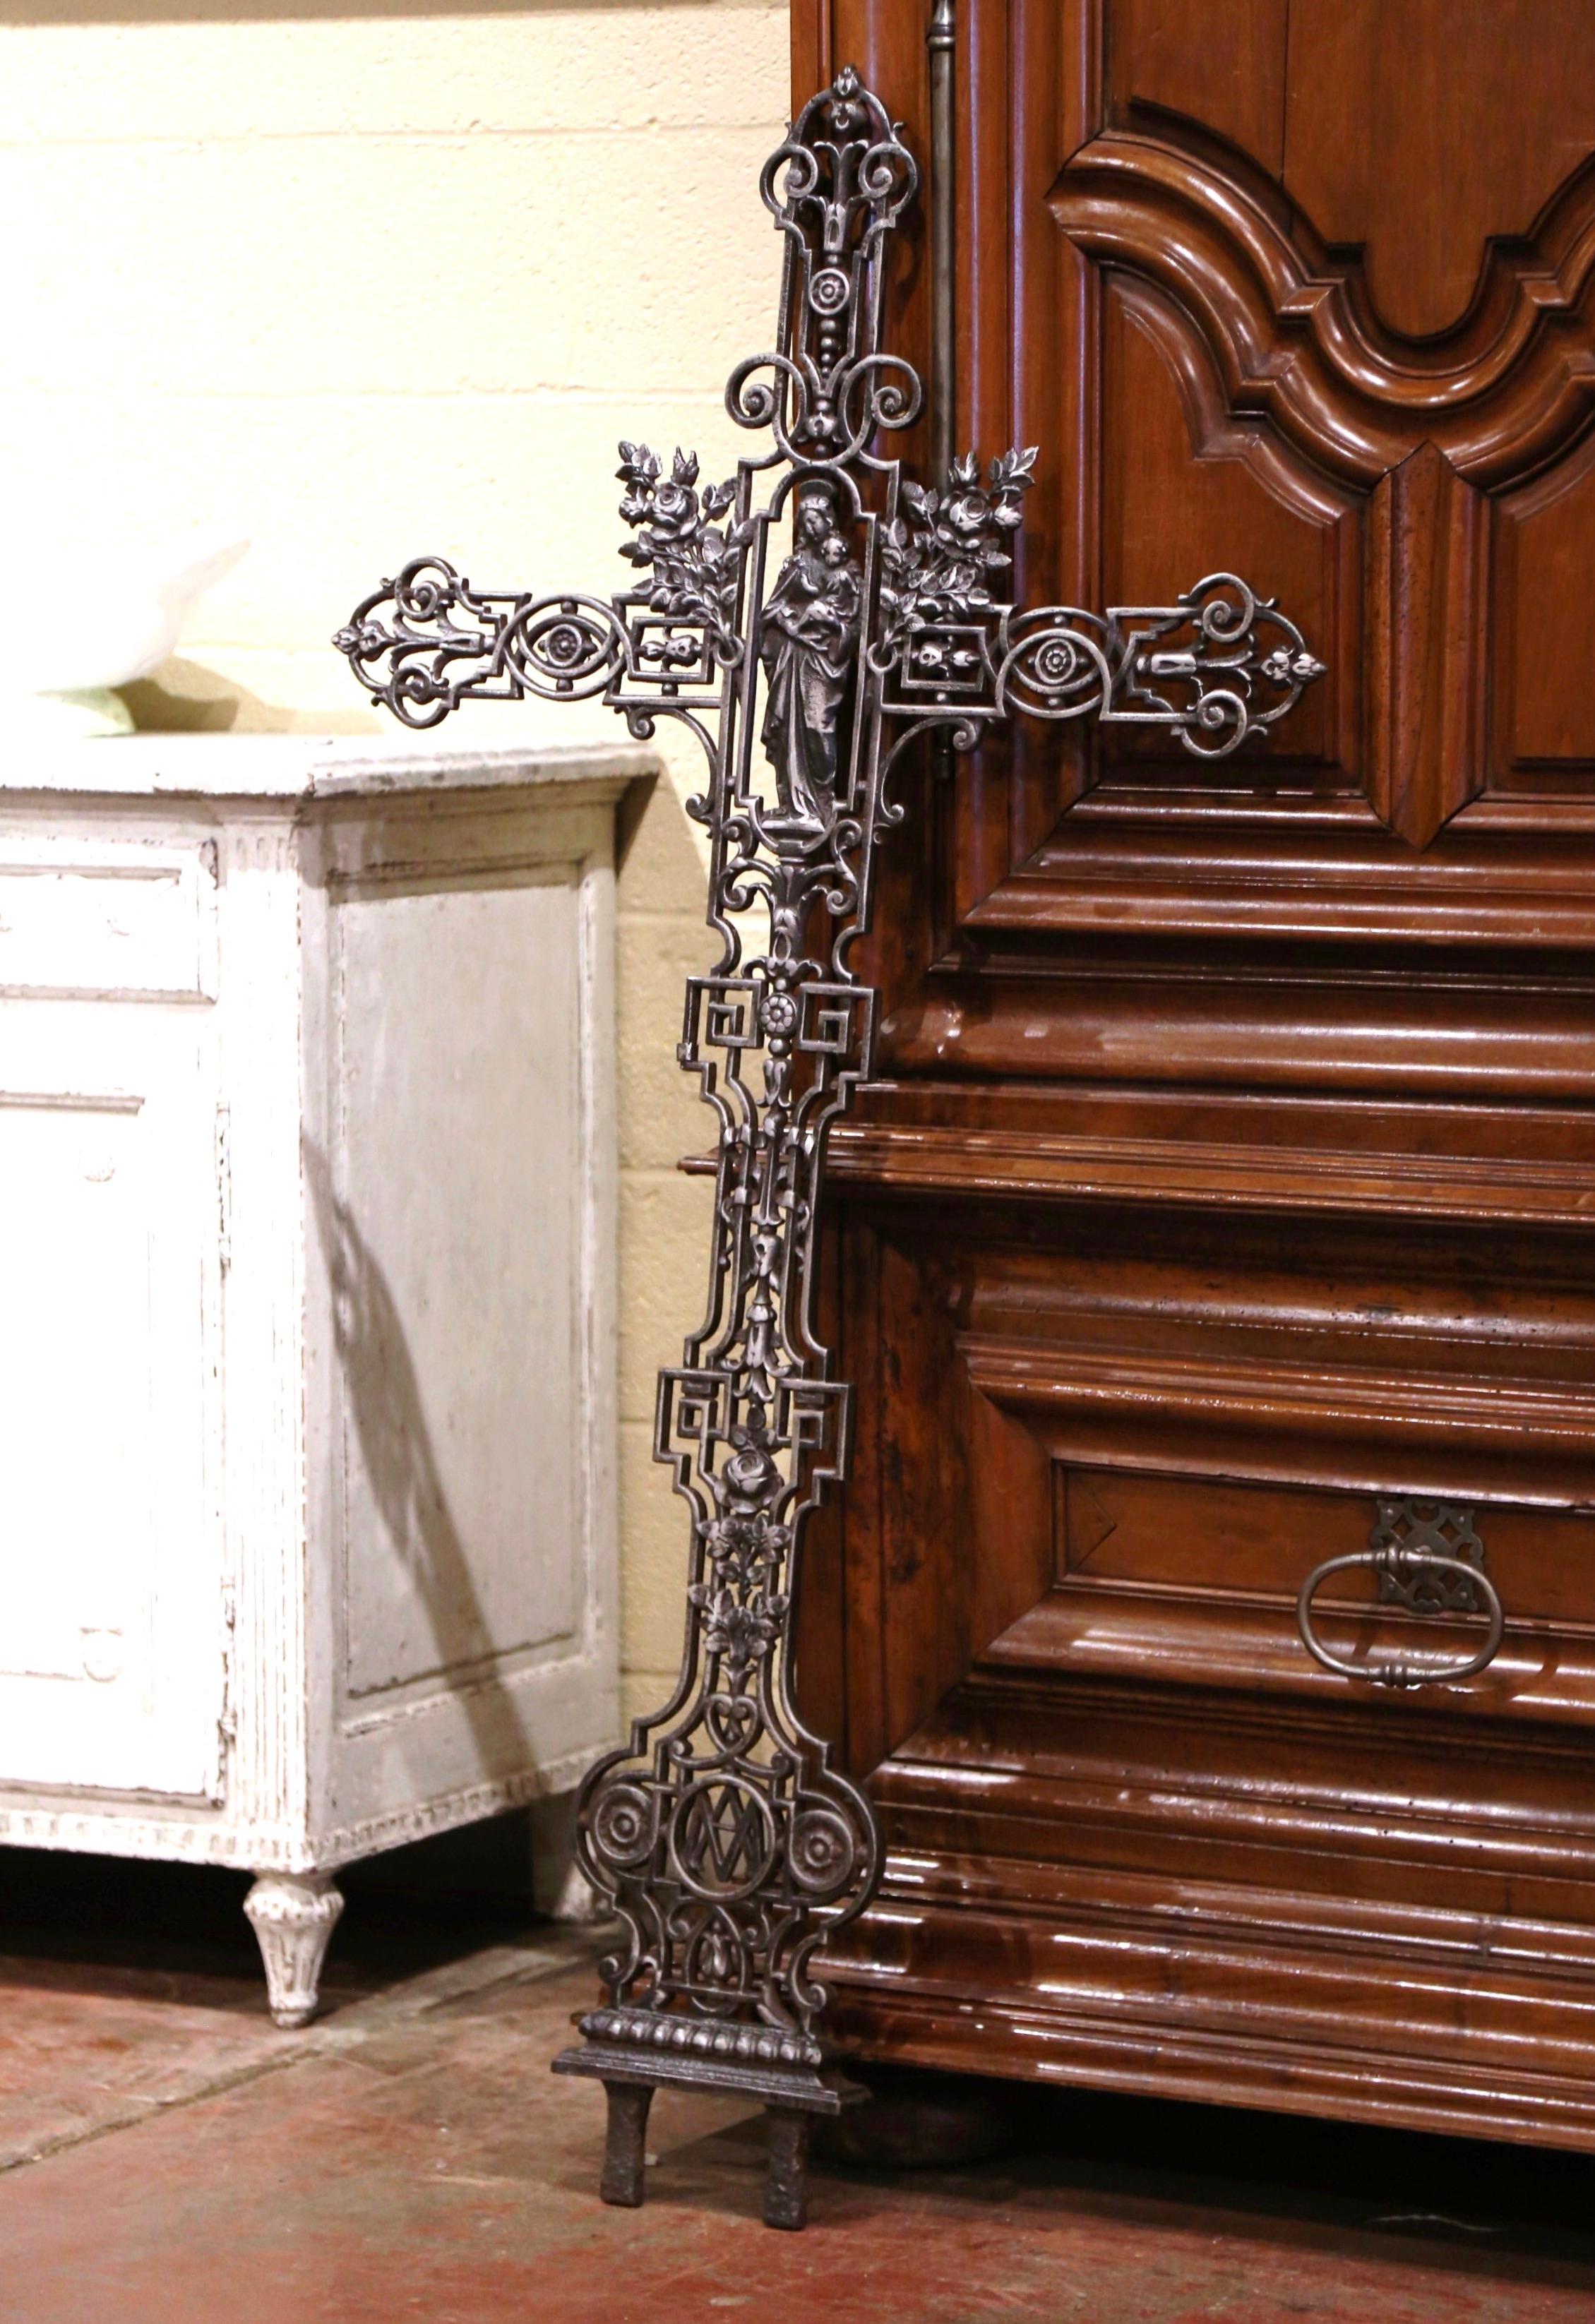 This beautiful, antique cross was crafted in France, circa 1870. The large iron piece is decorated with floral and leaf motifs in high relief all-over the cross, and embellished with a sculpture of Madonna holding the Child. The tall religious